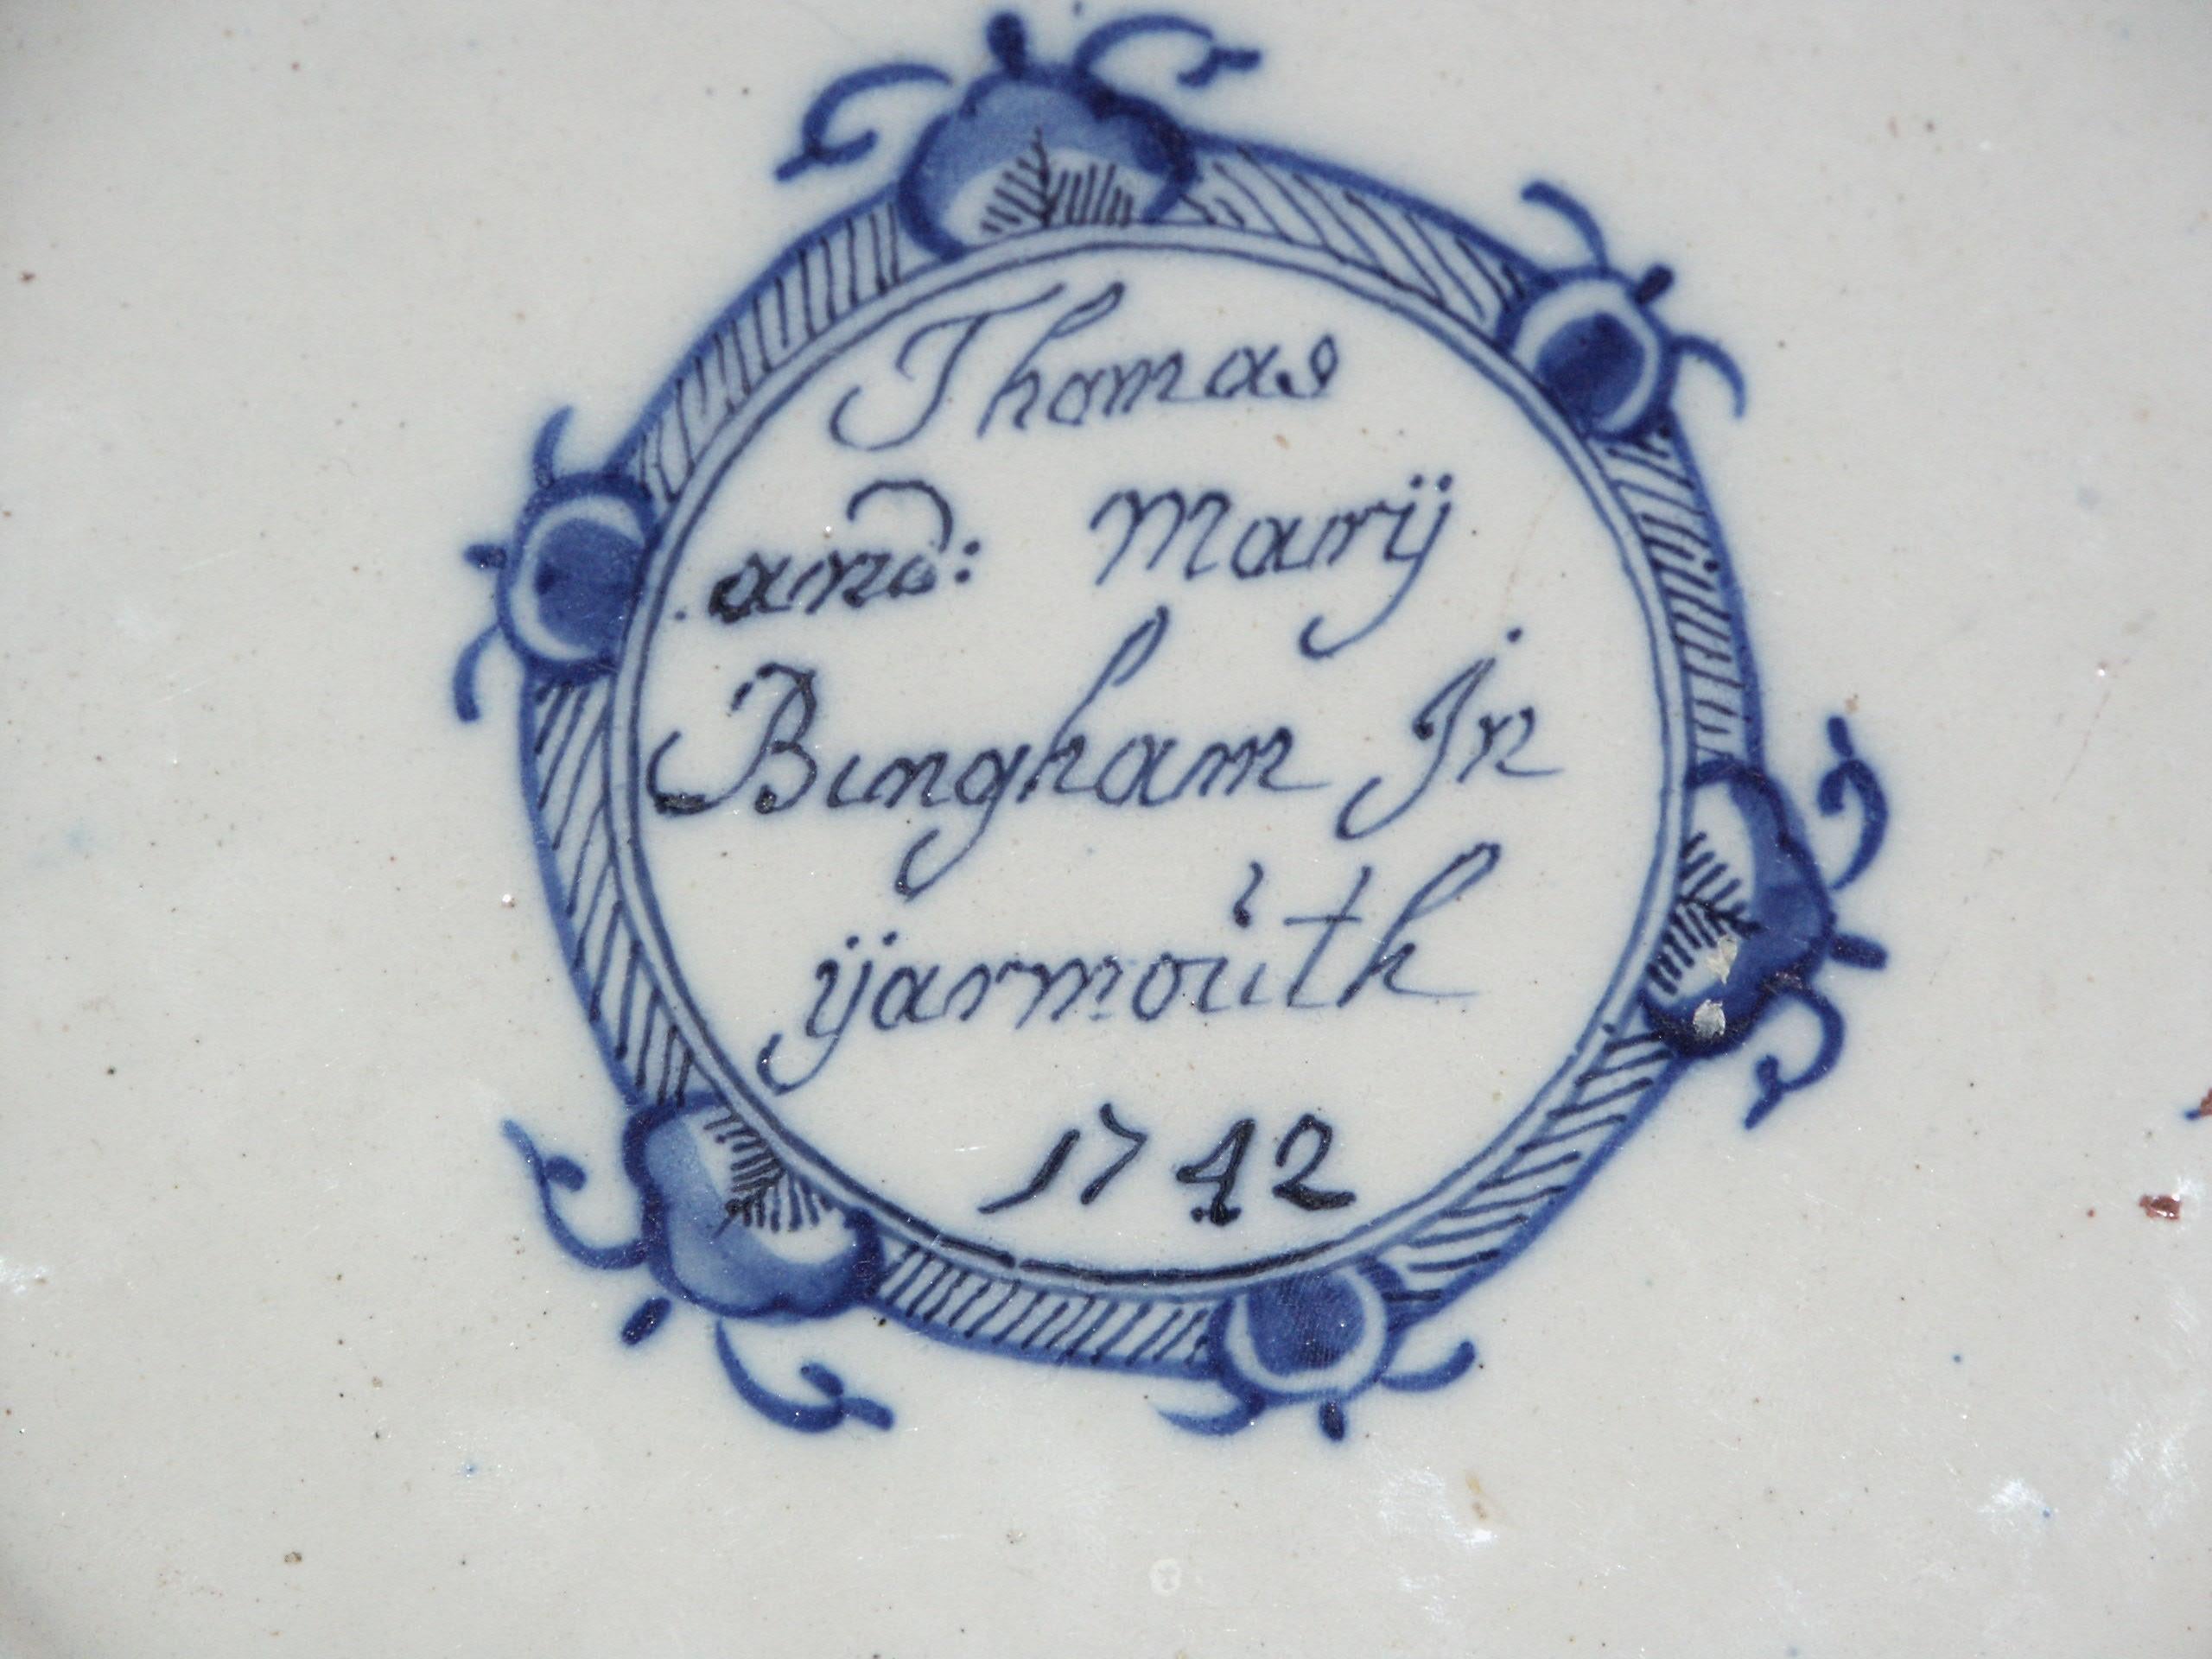 Baroque Plate, Delftware, 1742, Dutch, Thomas and Mary Bingham, Yarmouth, 1742, Suffolk For Sale